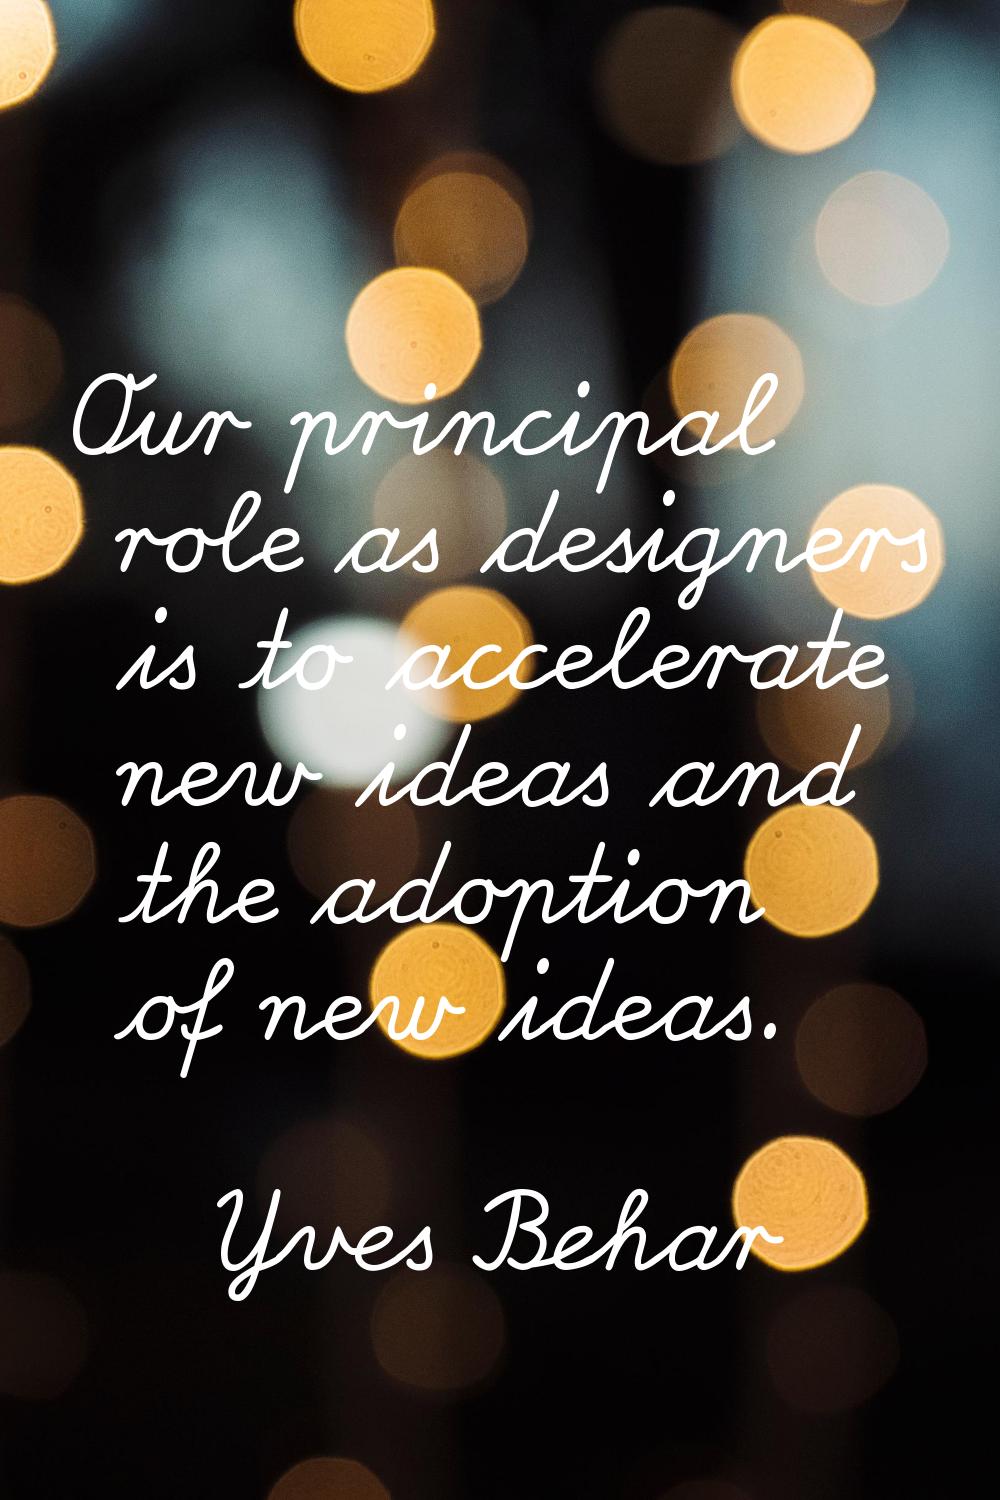 Our principal role as designers is to accelerate new ideas and the adoption of new ideas.